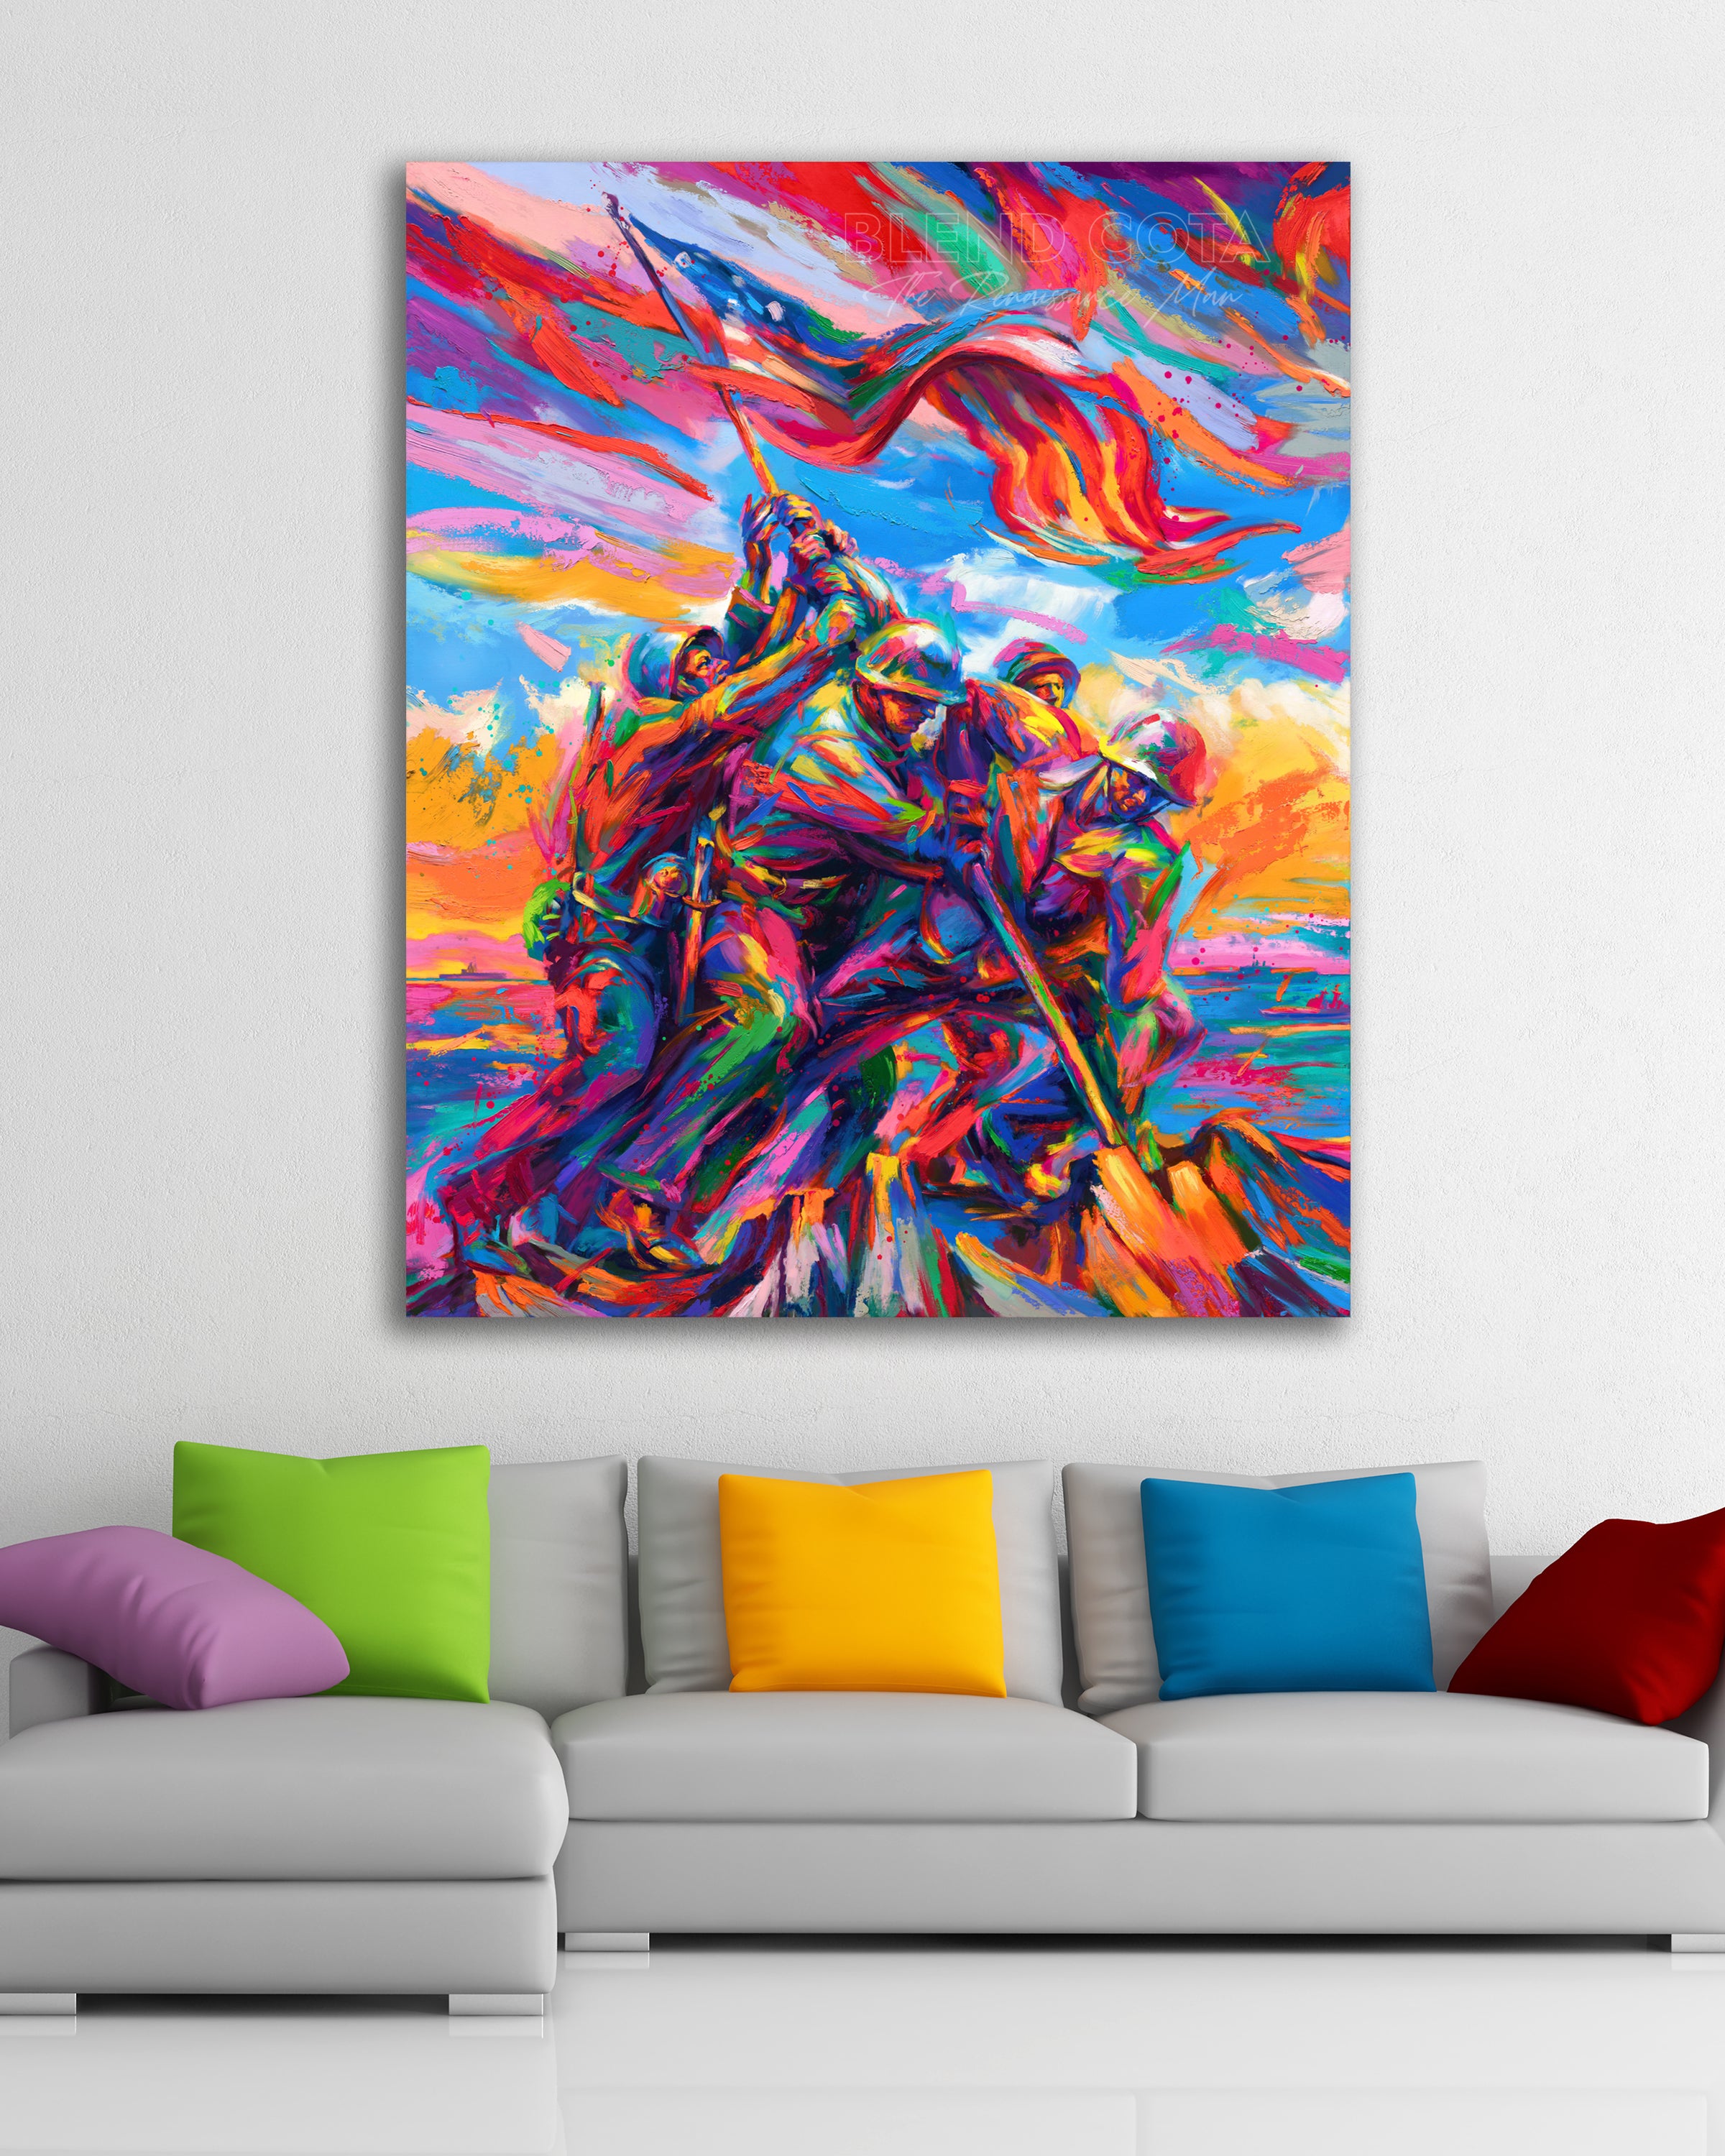 A room setting for the Limited edition print on metal of the Marine Corps War Memorial, with five marine soldiers and American Flag on Mount Suribachi, Iwo Jima in colorful brushstrokes, color expressionism style.